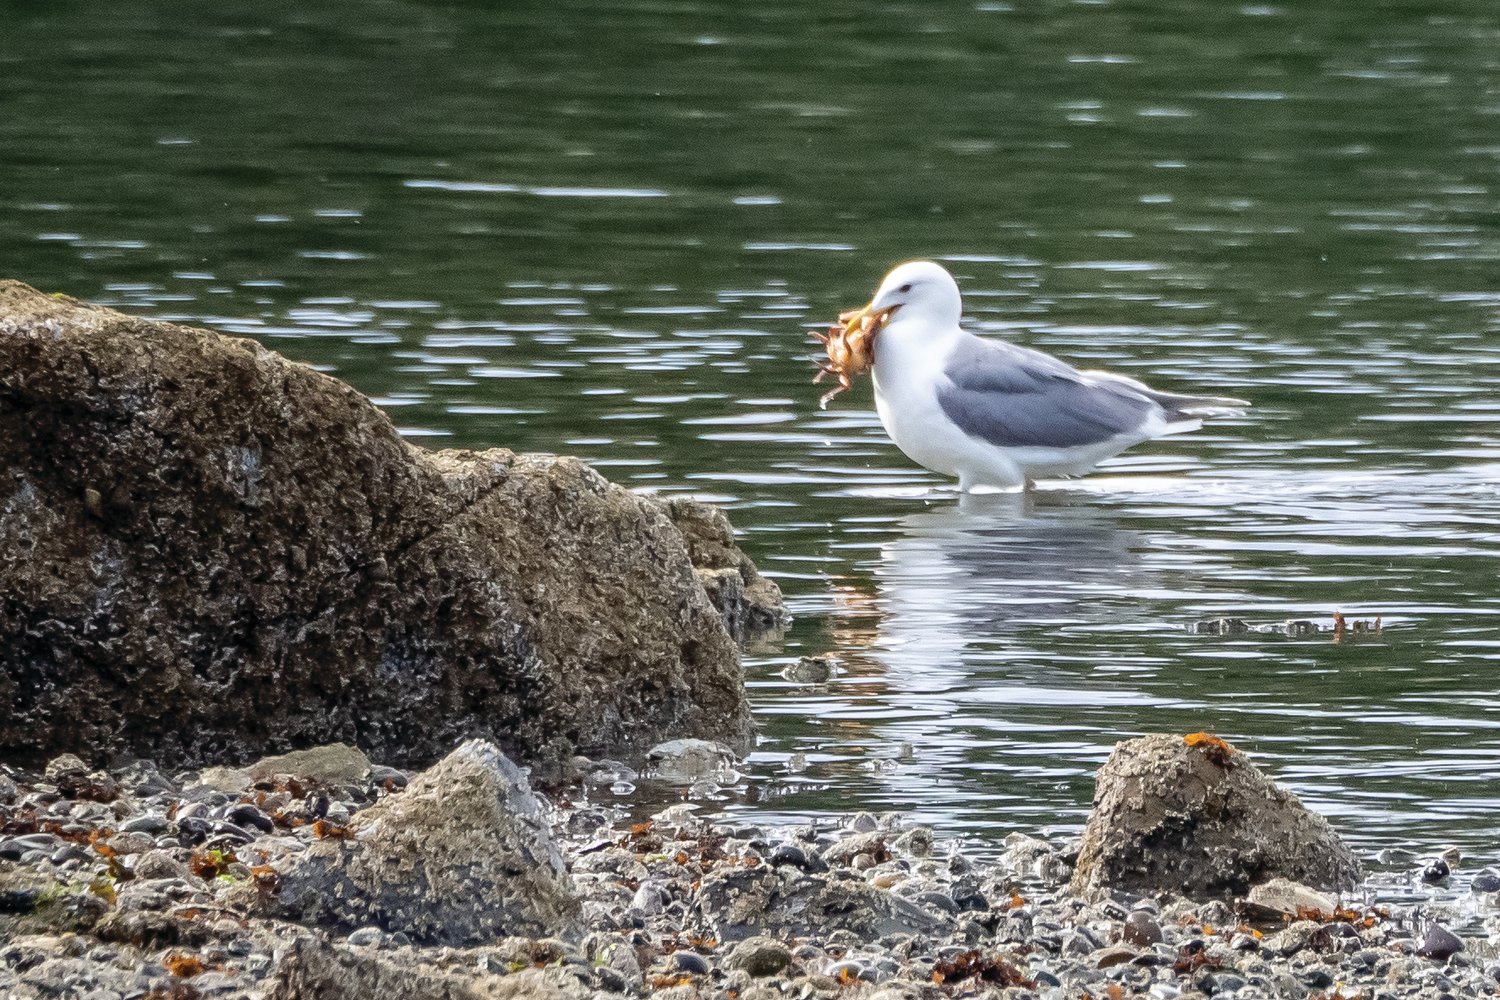 A happy gull dines on crab for breakfast at Oak Bay.